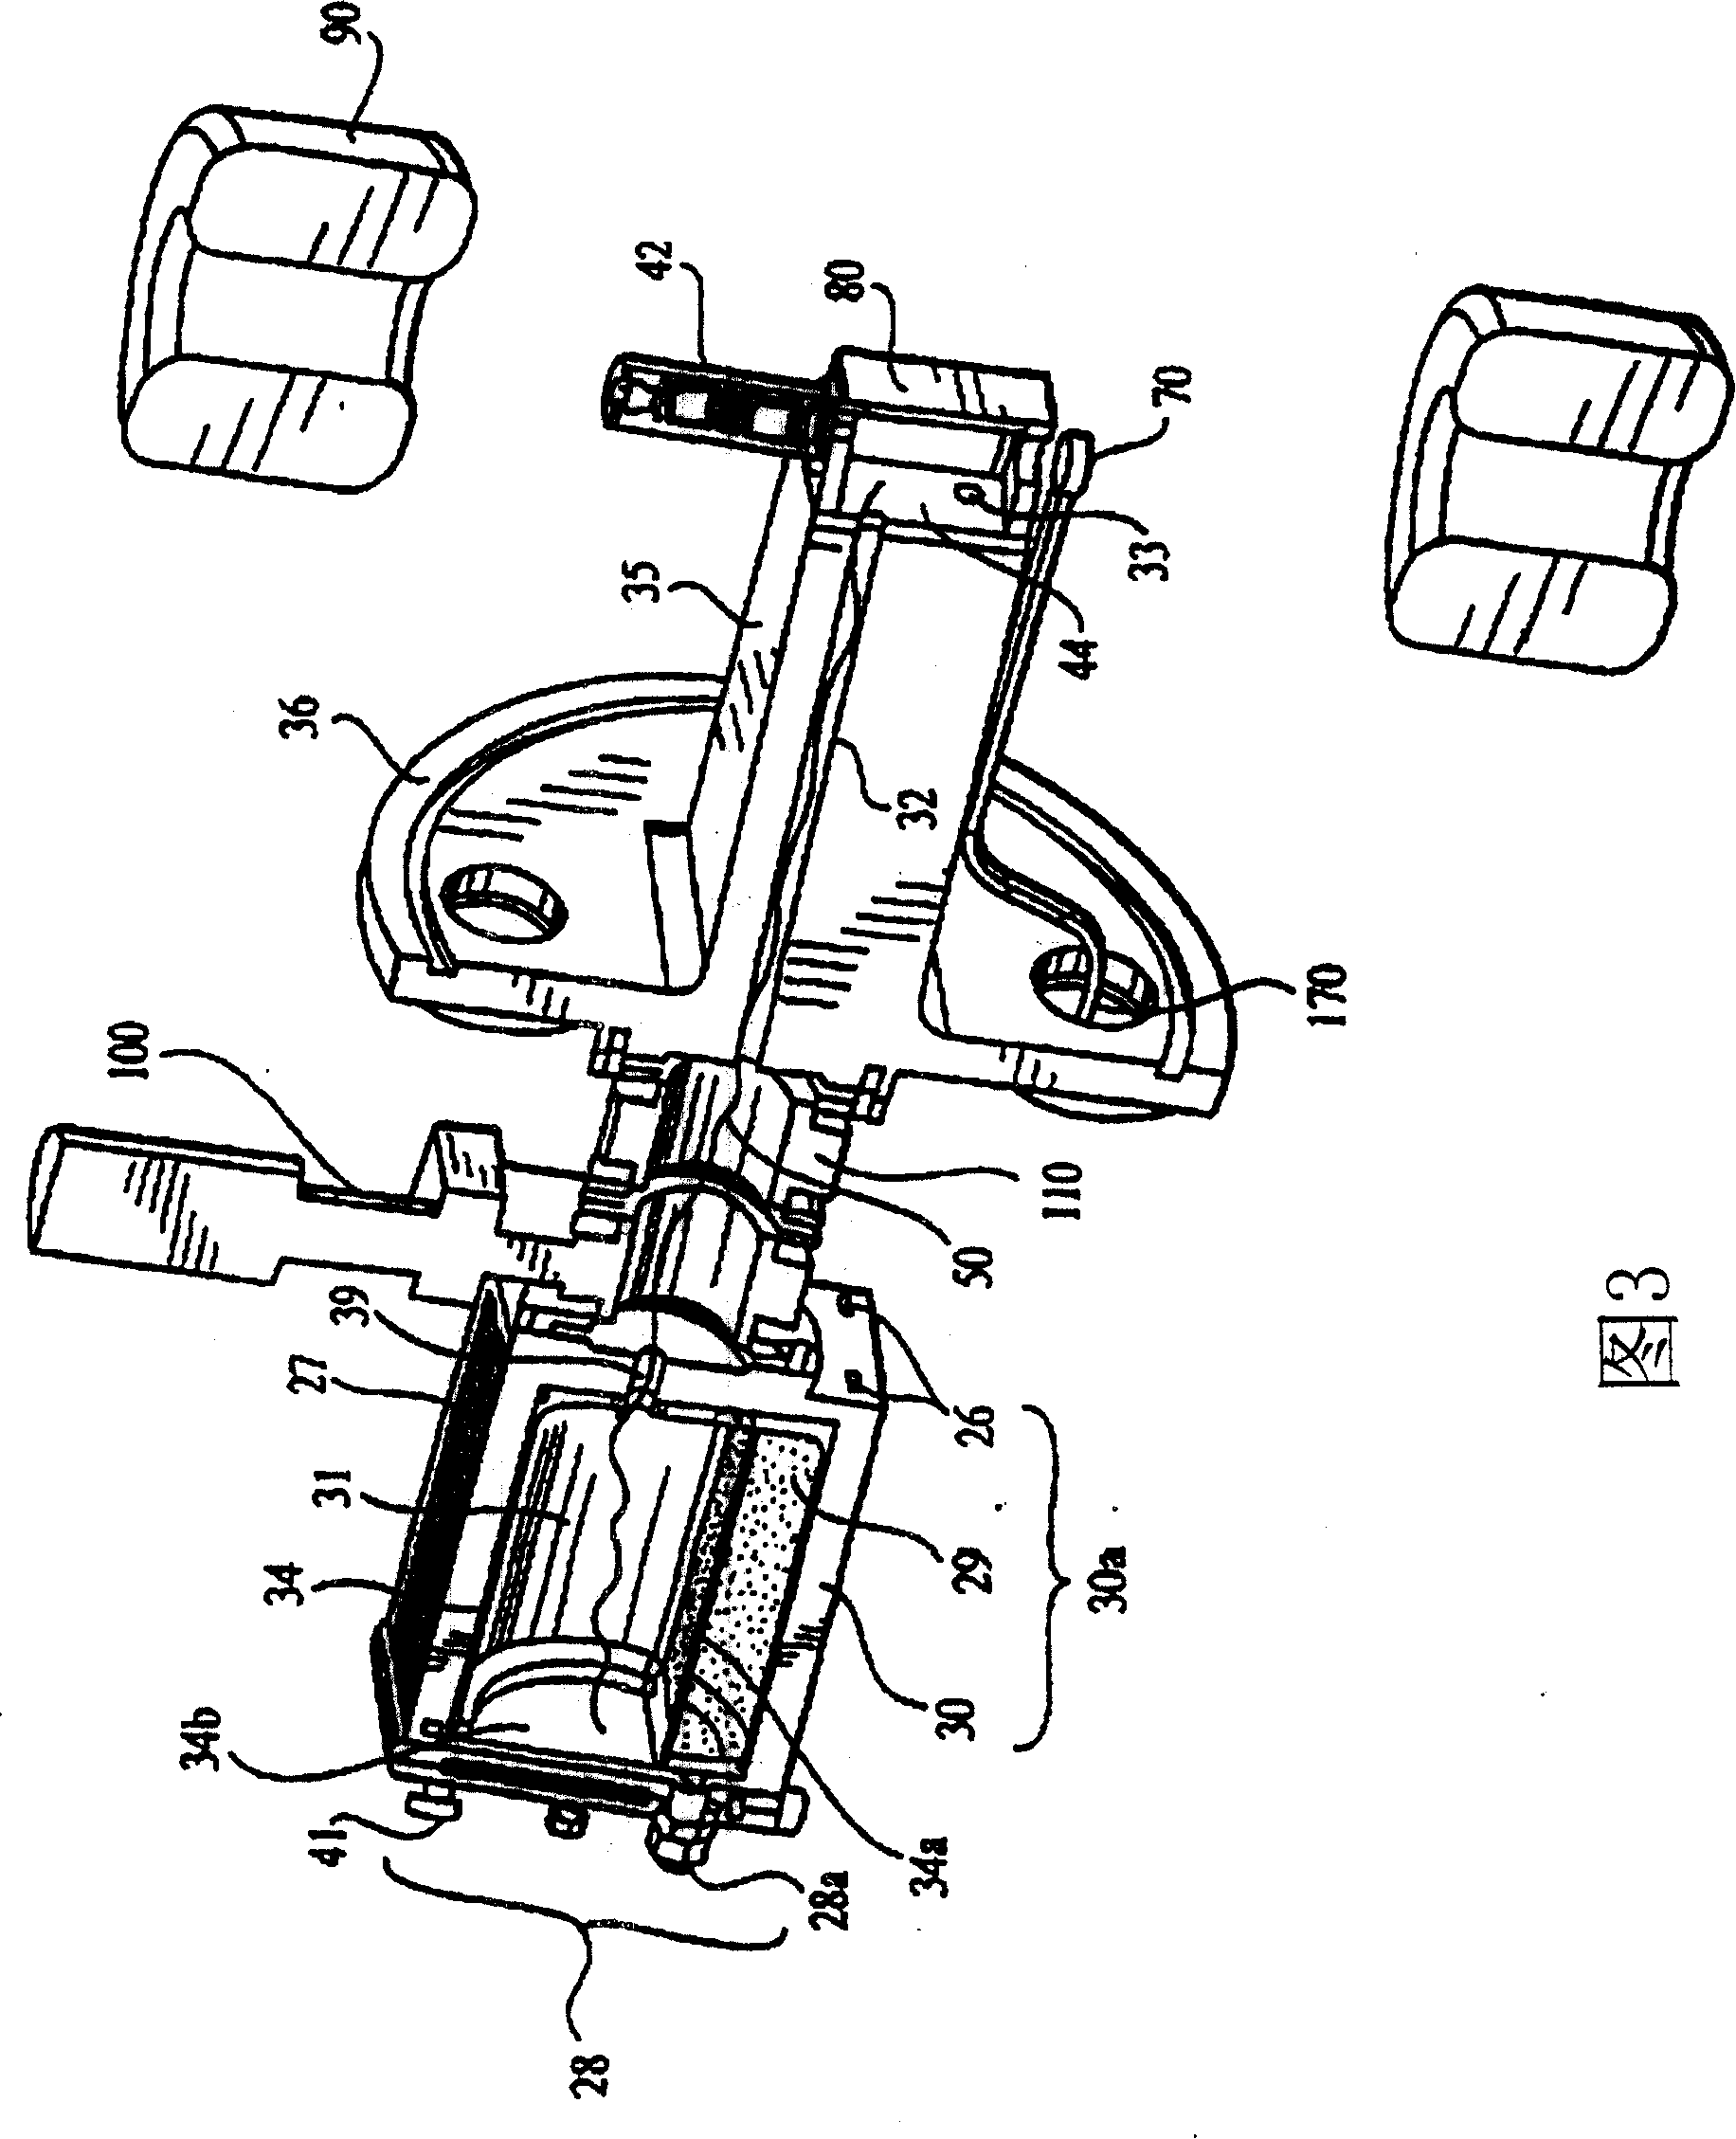 Ion implantation system and ion source